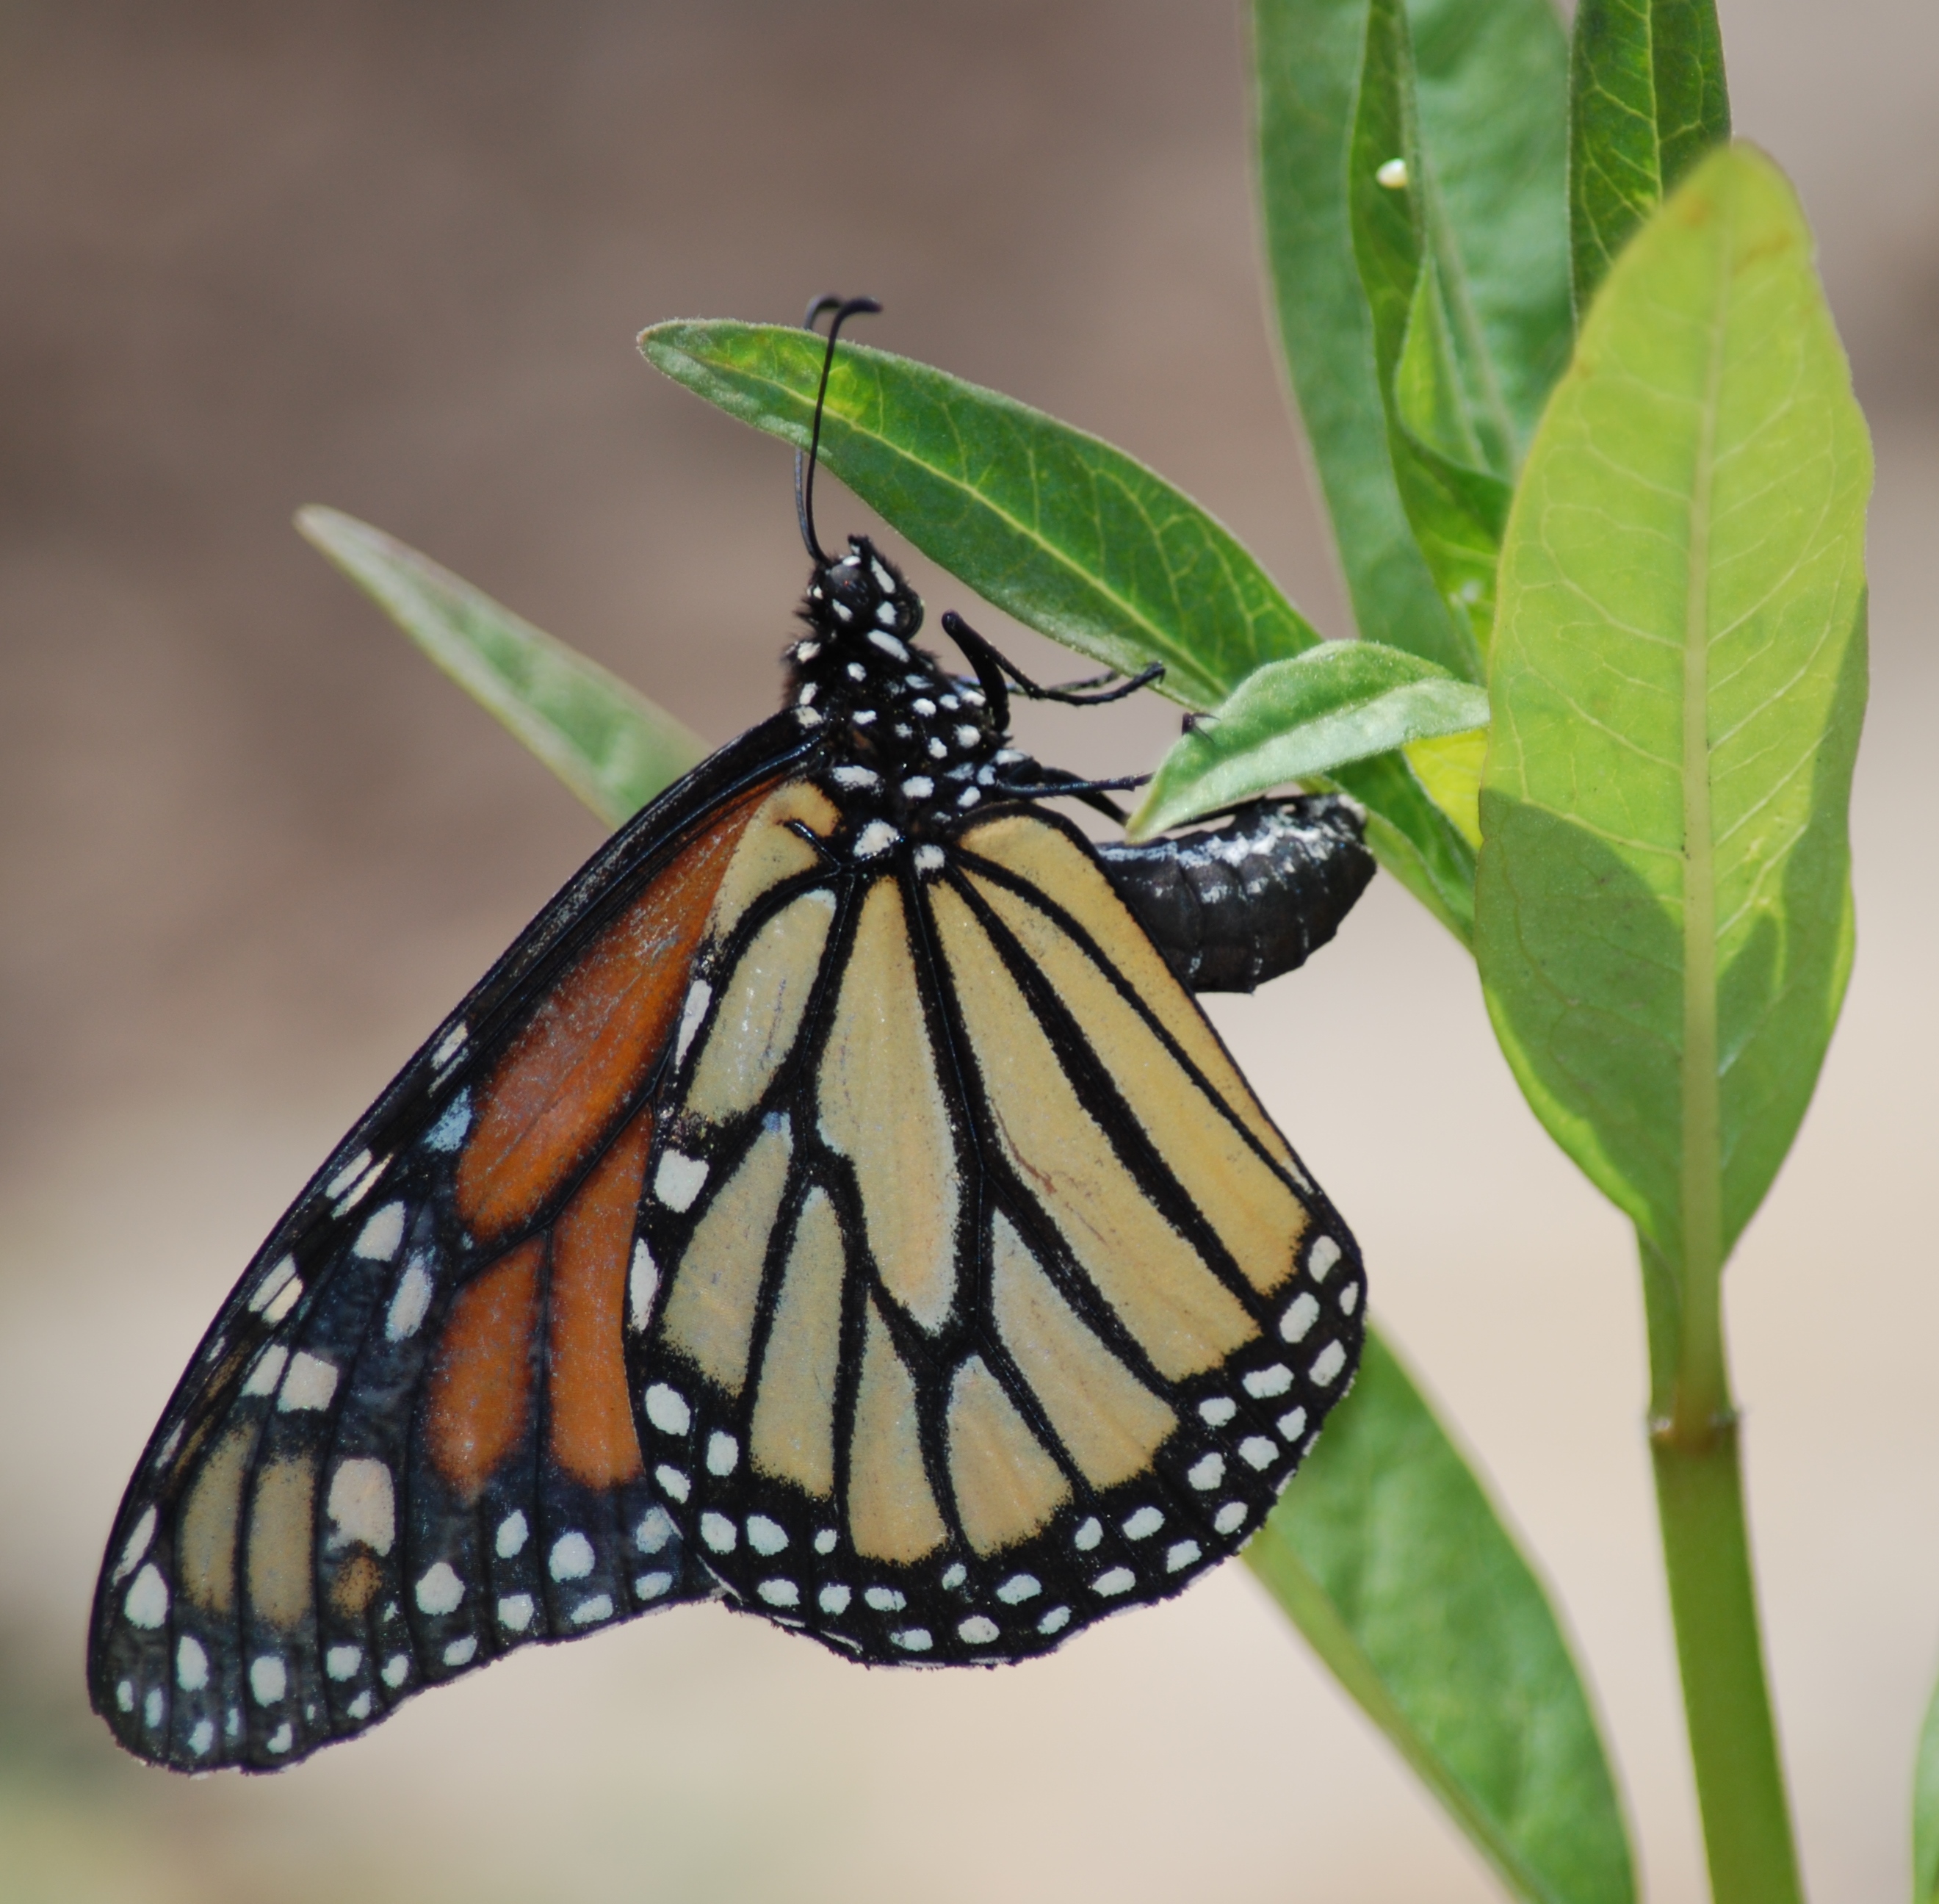 Monarch Butterfly on plant leaf at Topeka Zoo